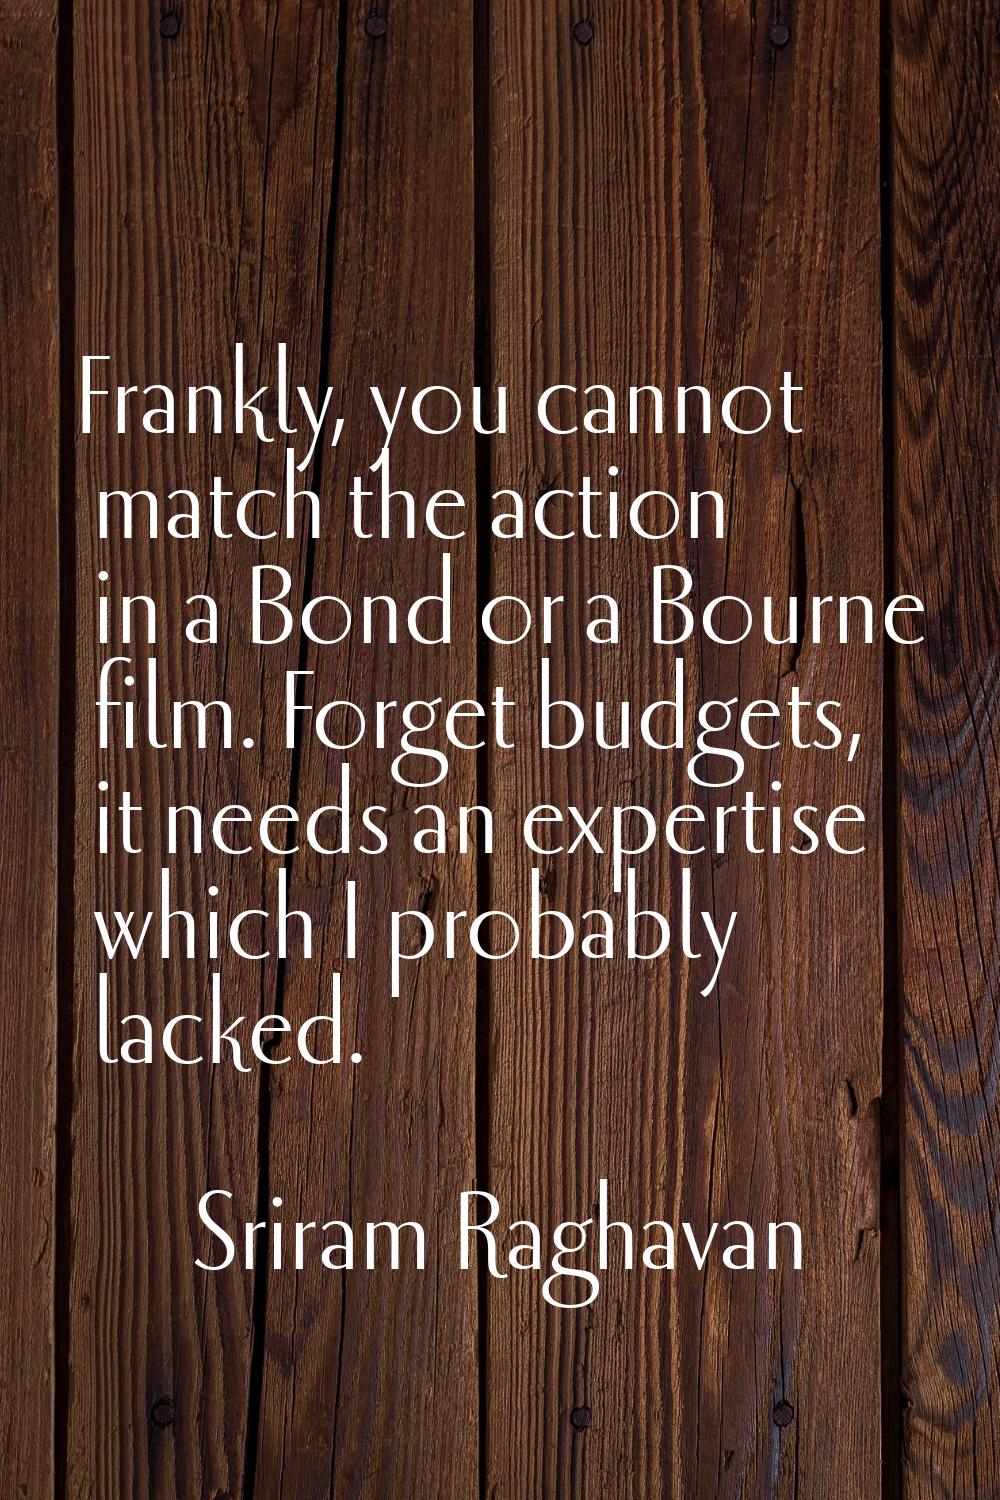 Frankly, you cannot match the action in a Bond or a Bourne film. Forget budgets, it needs an expert